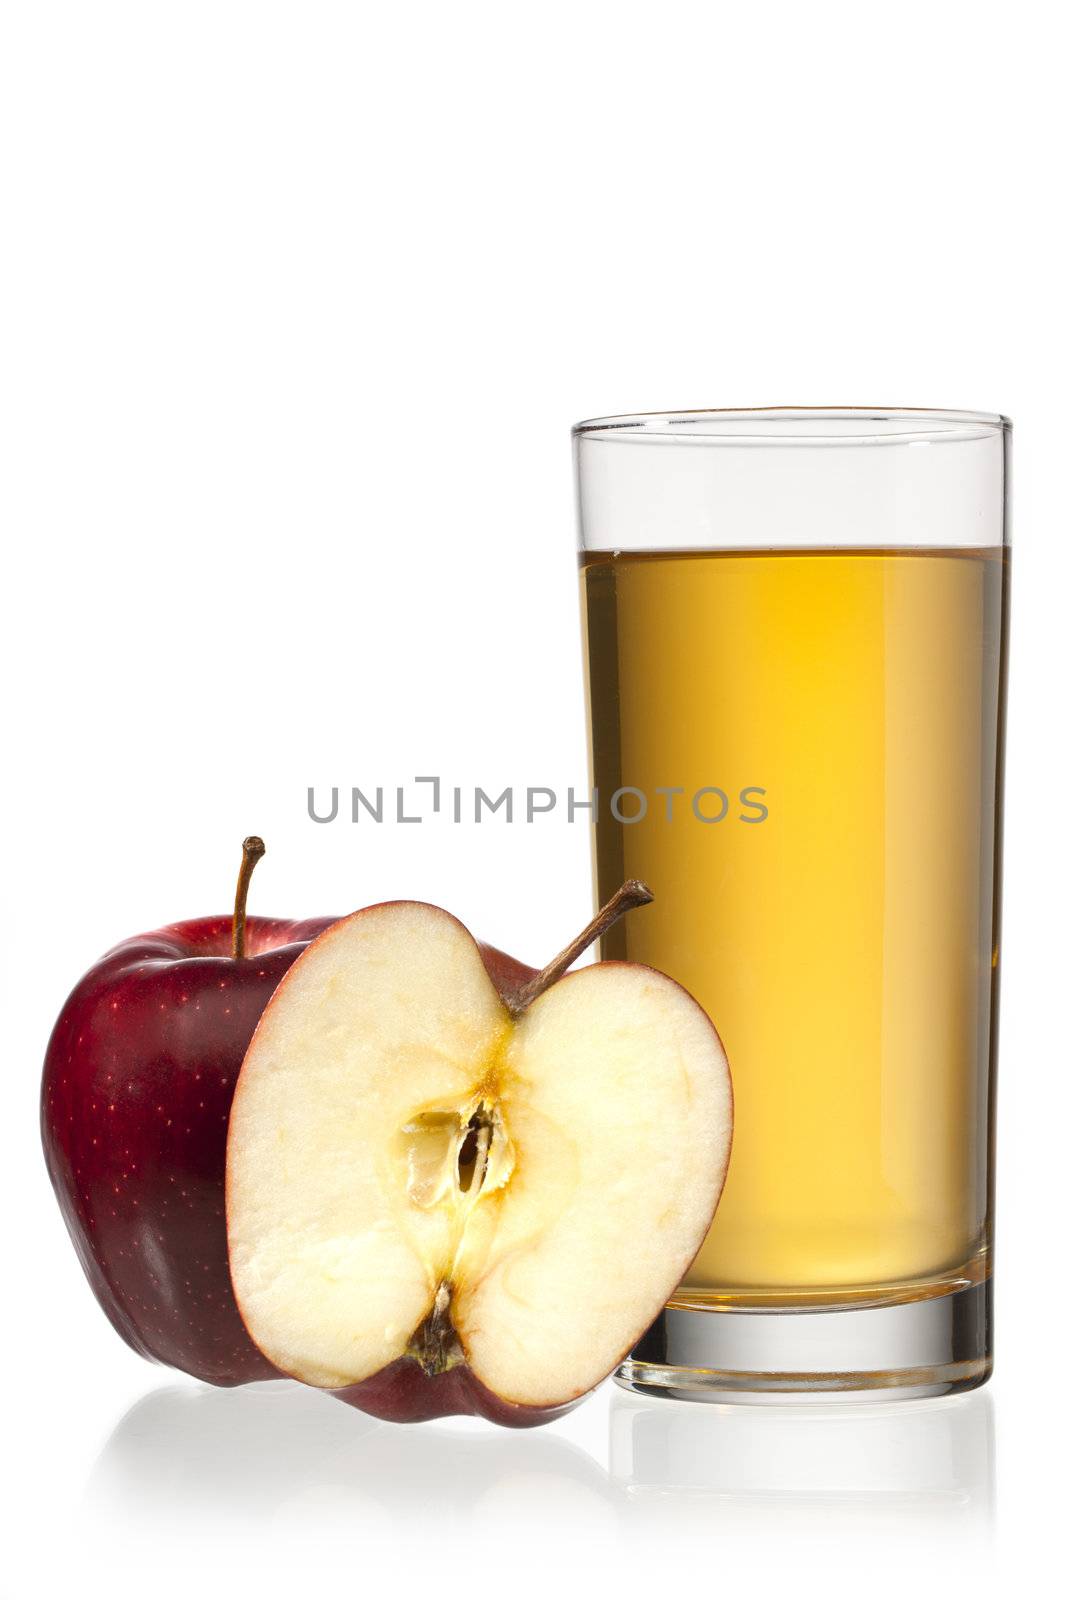 Apple juice with crisp looking apple in foreground and isolated on white